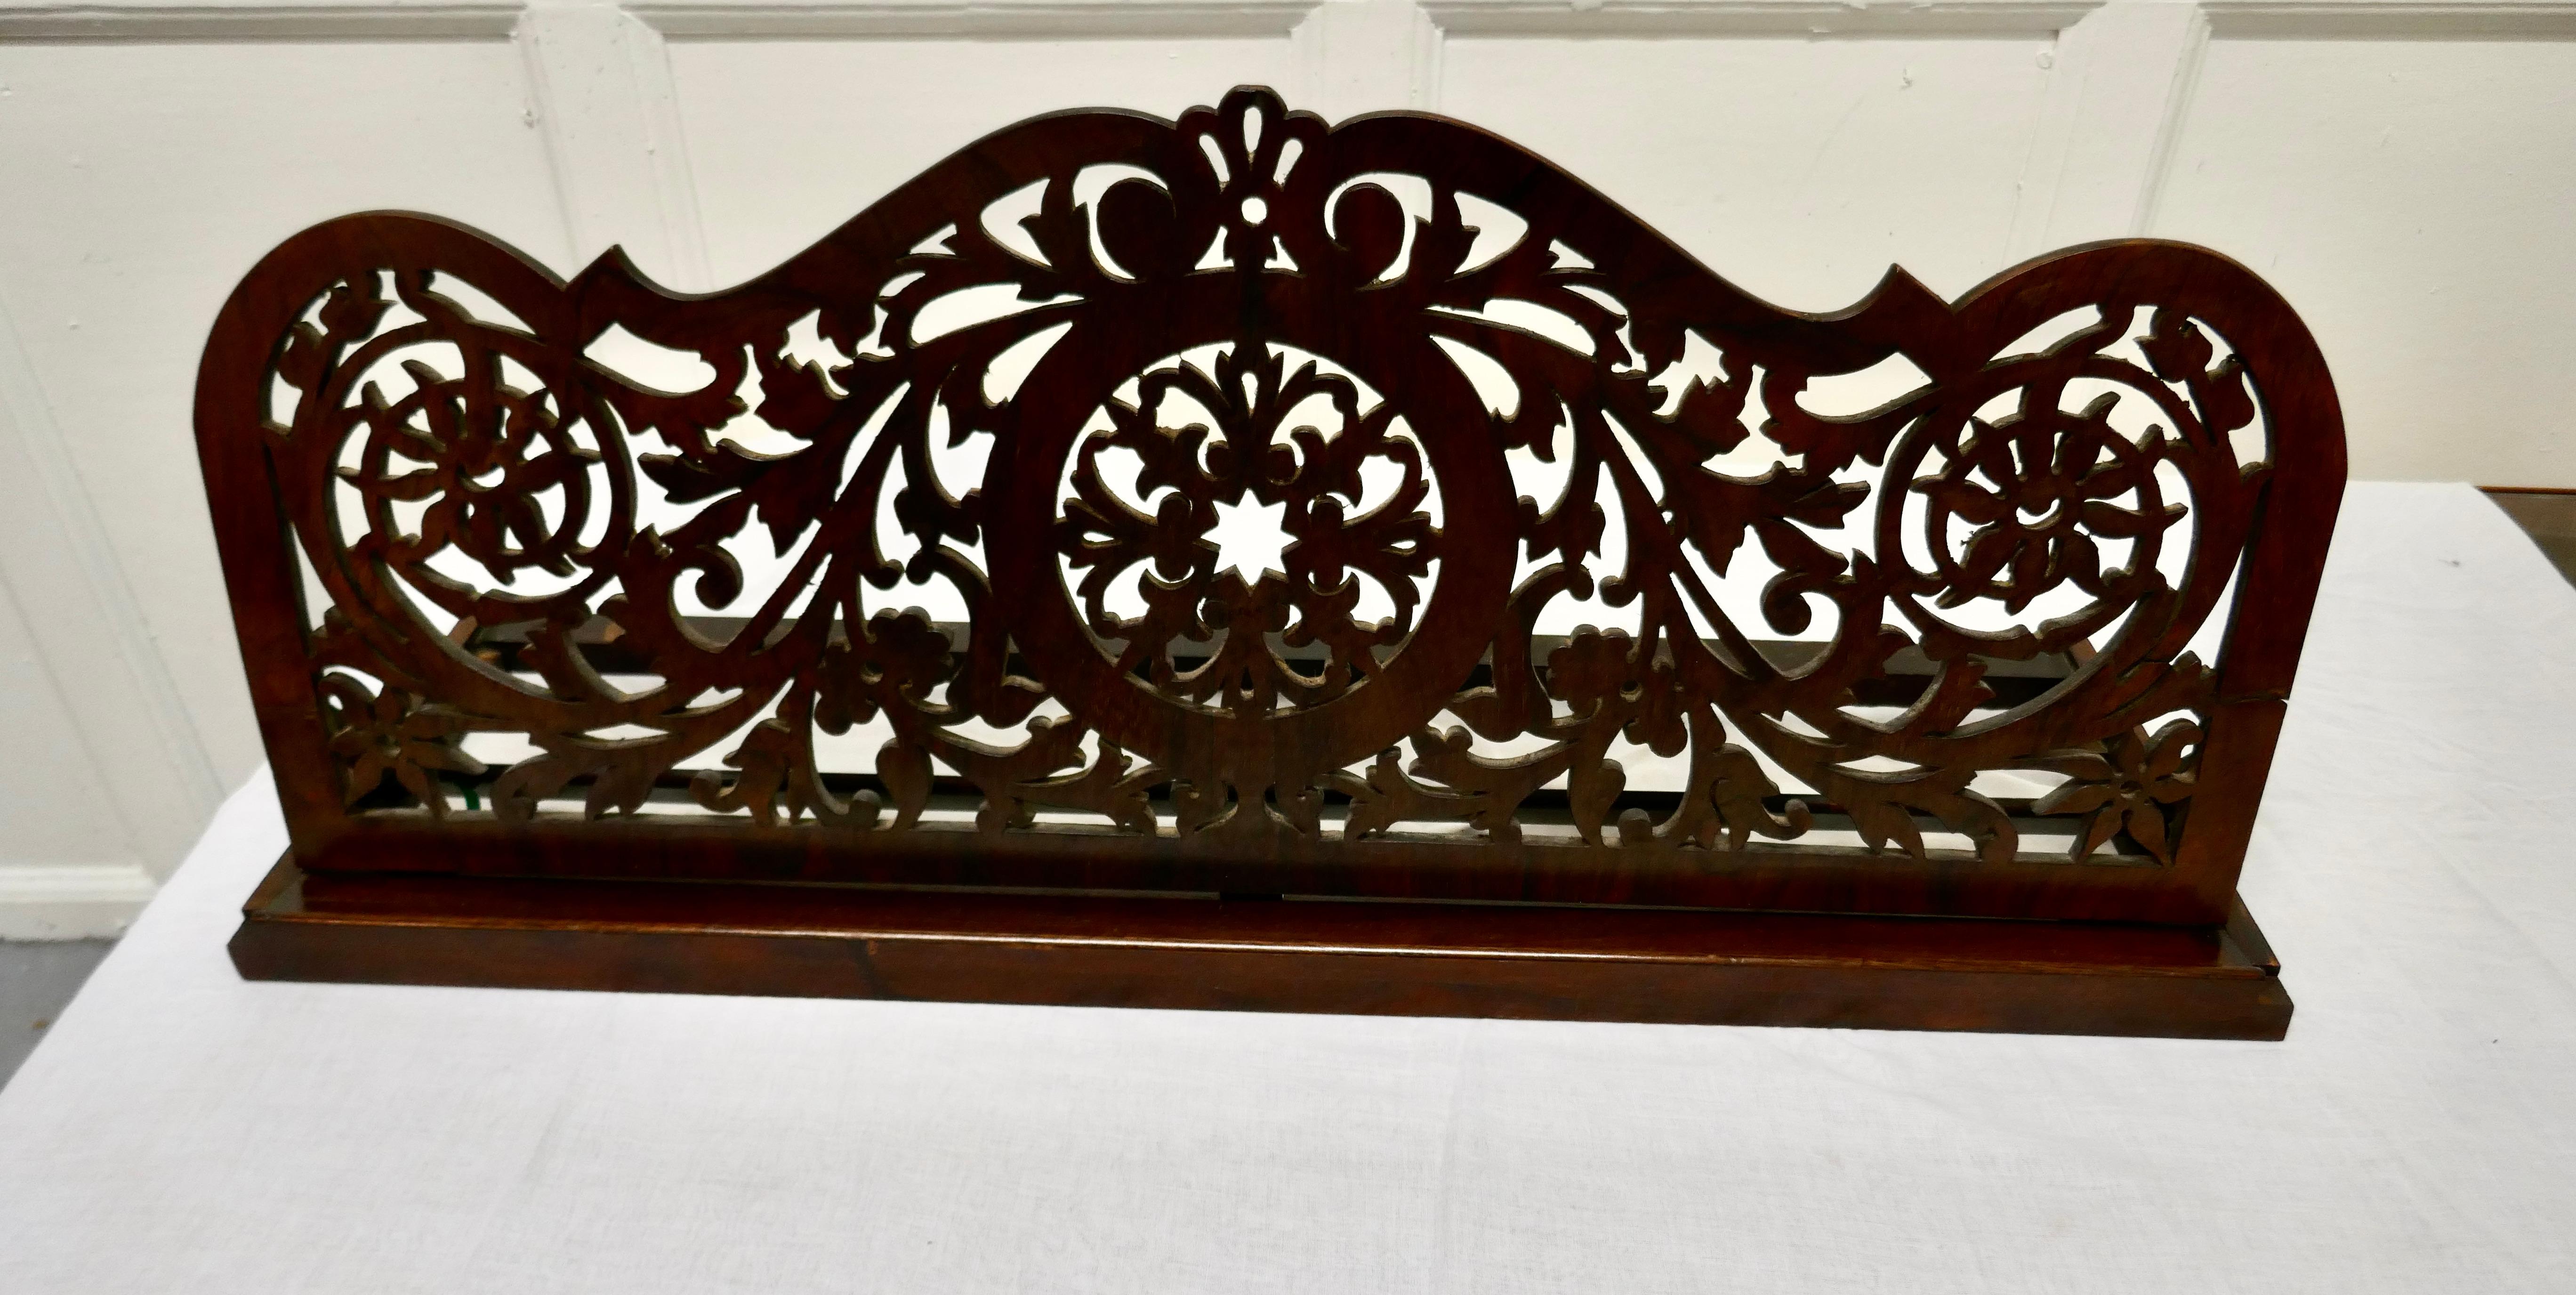 Adjustable Fretwork mahogany book rest or, Lutrin

This is a charming piece, it is larger than normal and made in beautifully figured walnut, it dates from the end of the 19th Century and has been superbly hand crafted by a skilful master.

The